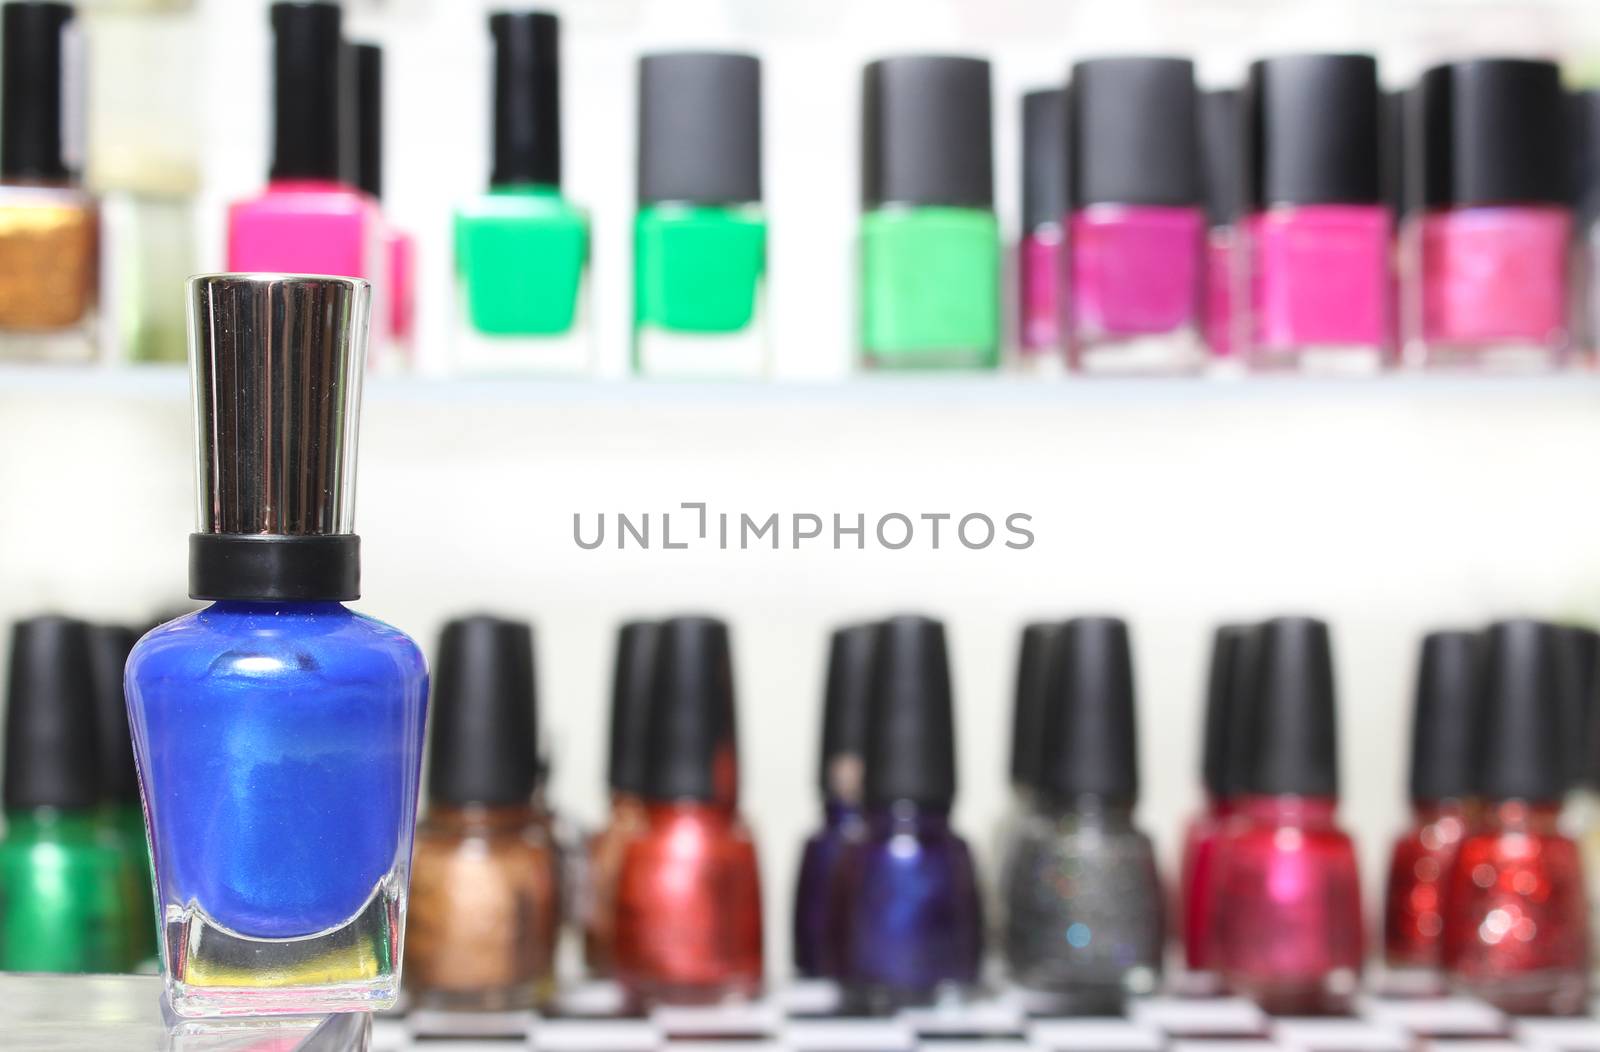 Nail Polish With Blurred Nail Polish Display in Background by Marti157900